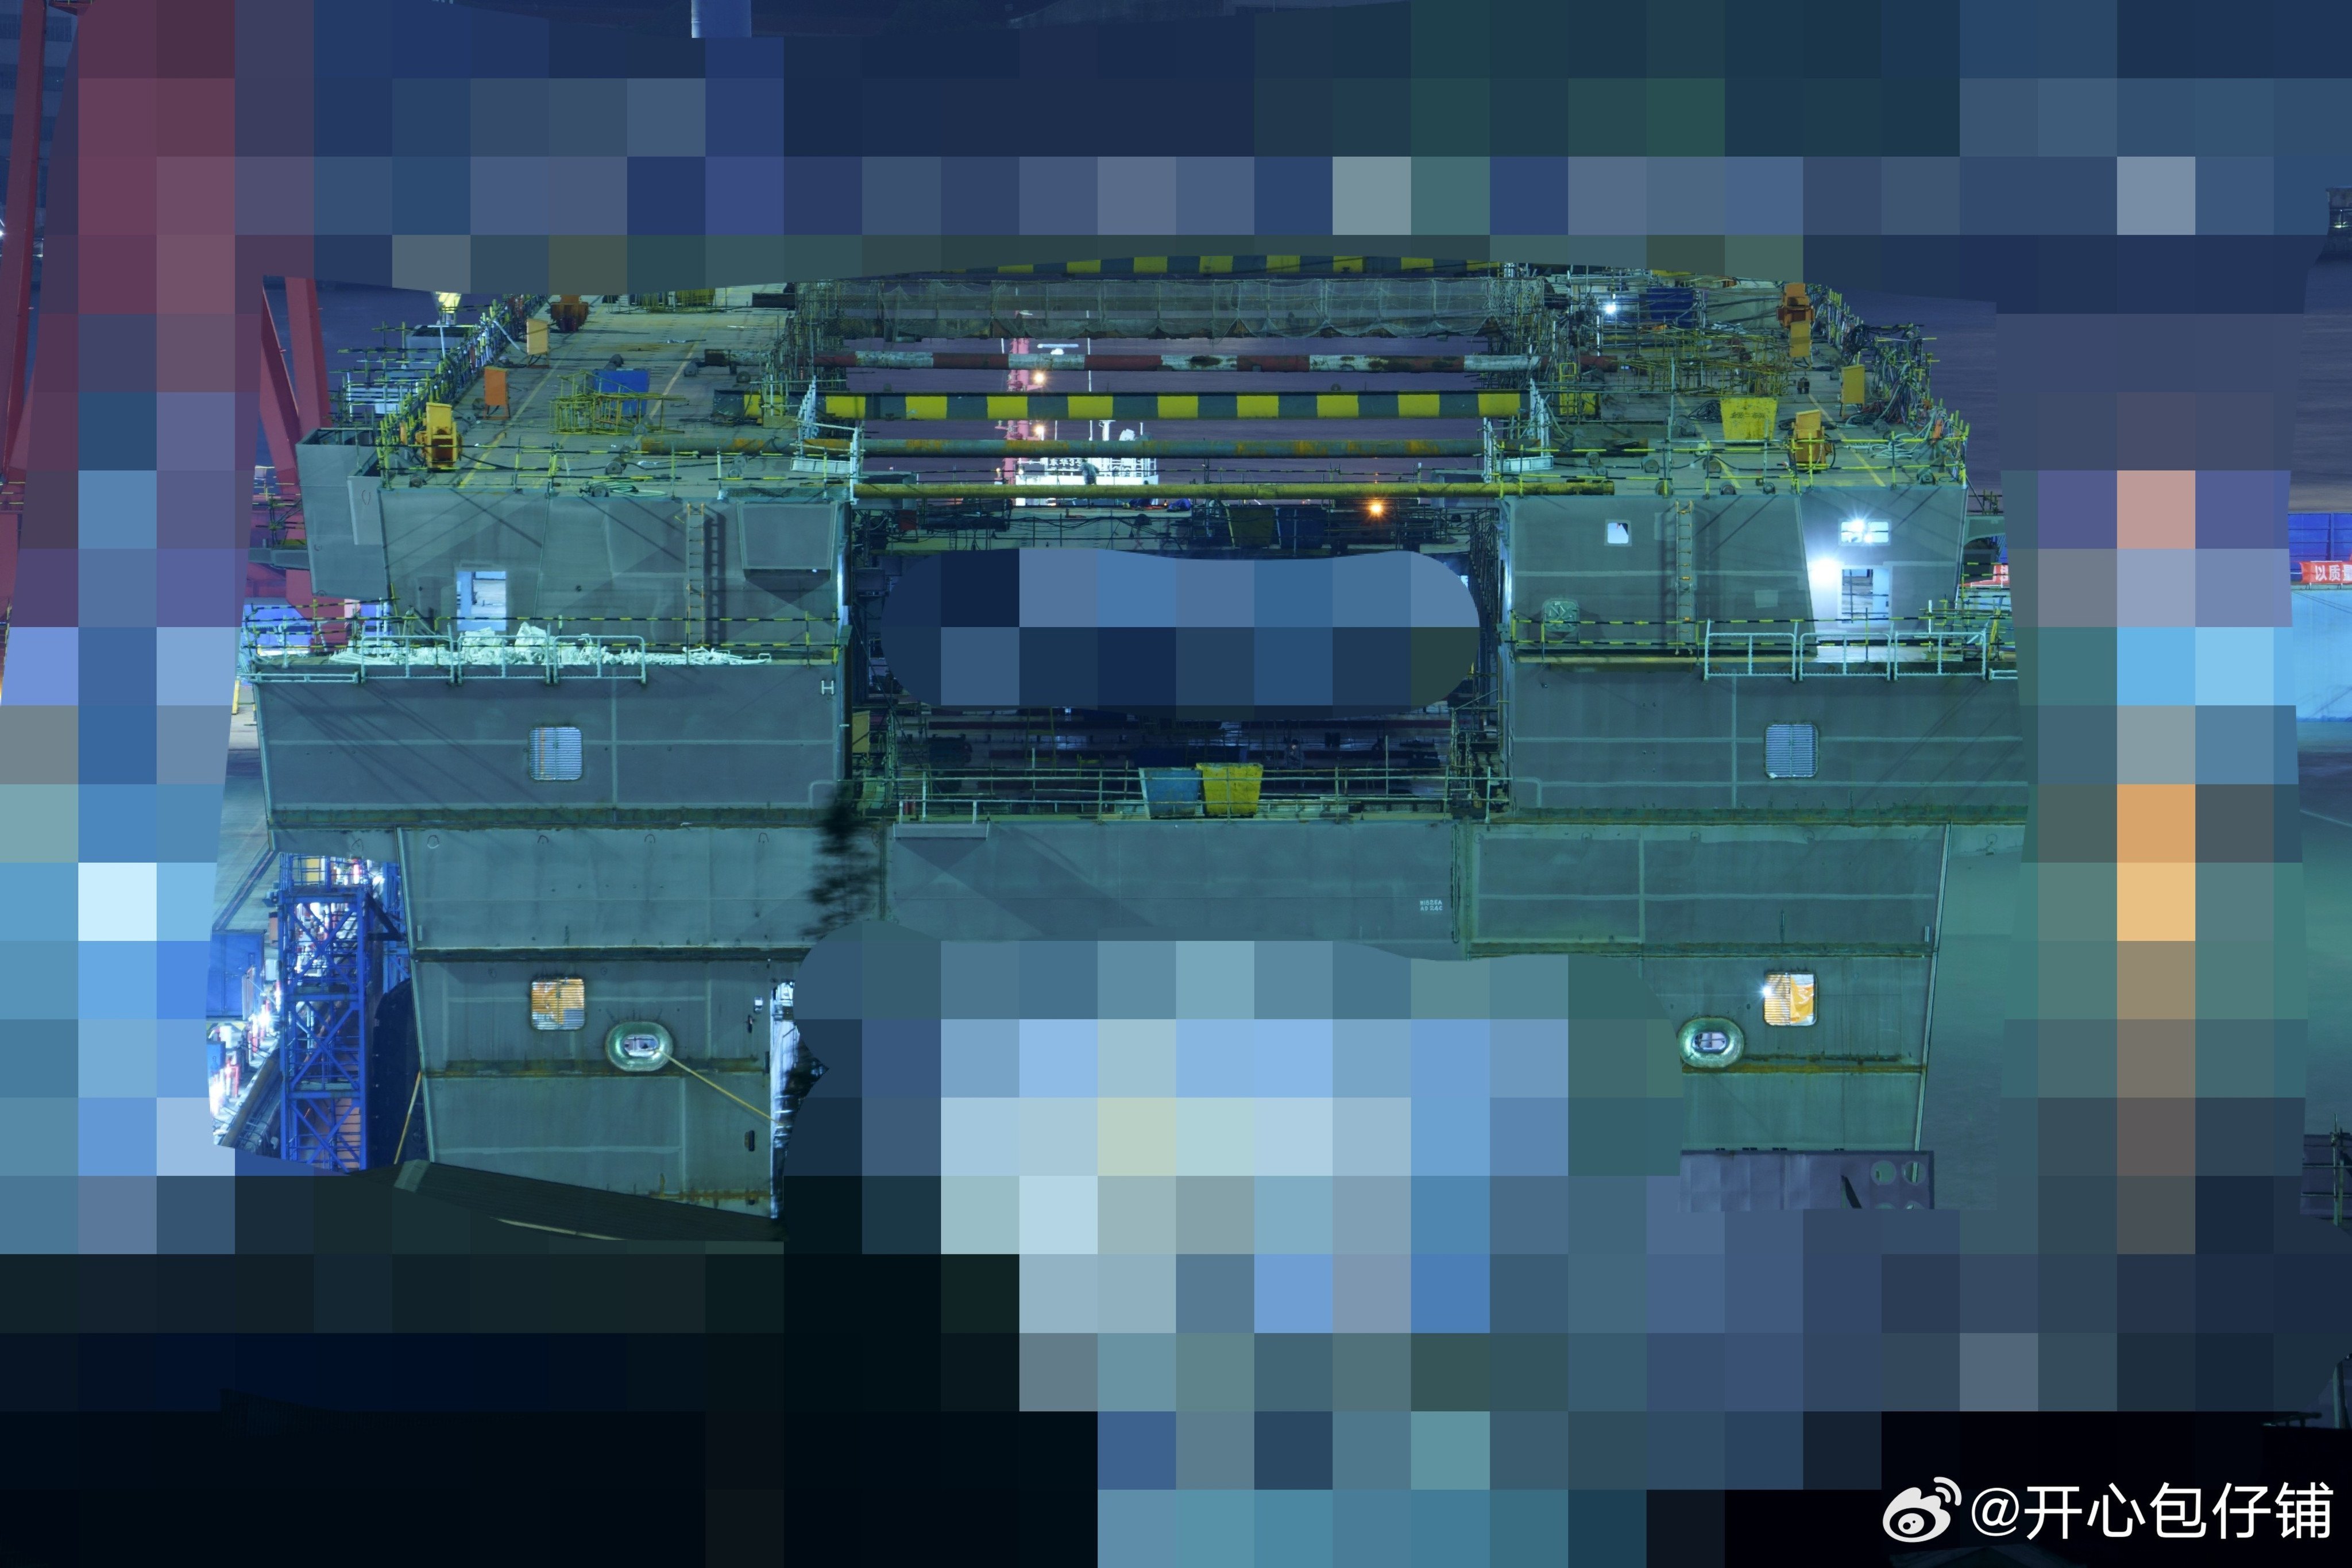 Imagery posted on social media of the PLA’s fourth Type 075 amphibious helicopter assault ships in dry dock shows its deck uncapped, despite the hull being nearly completed. Photo: Weibo